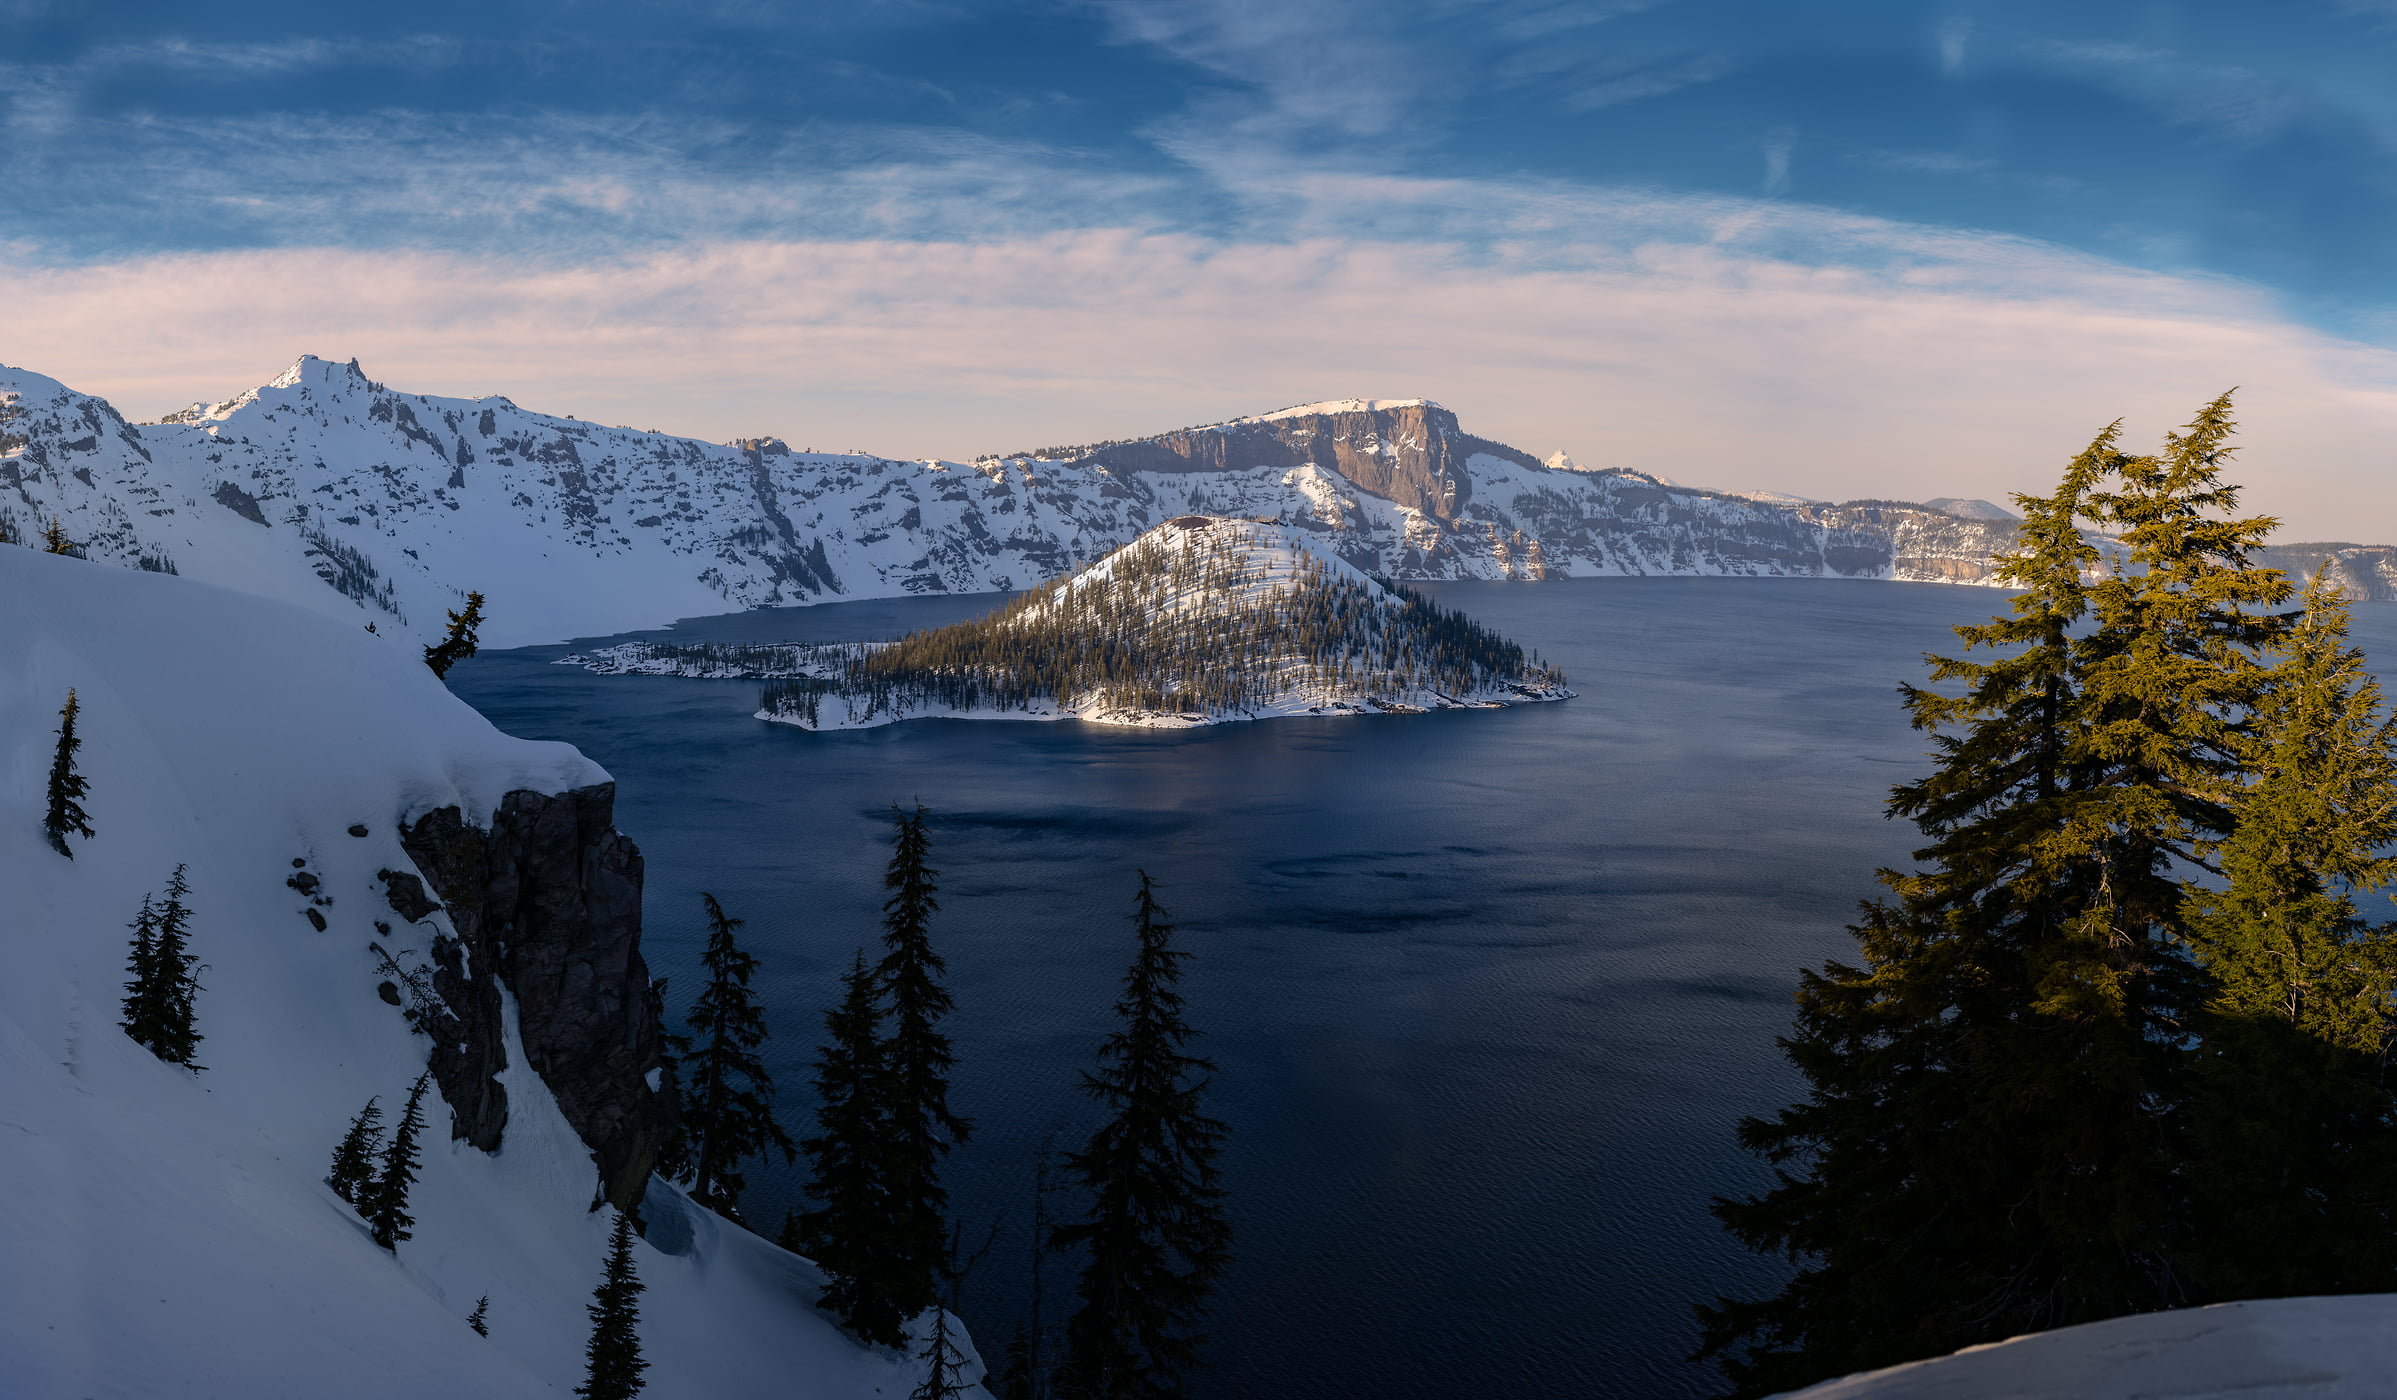 987 megapixels! A very high resolution, large-format VAST photo print of a snowy lake; landscape photograph created by Chris Blake in Crater Lake National Park, Oregon.